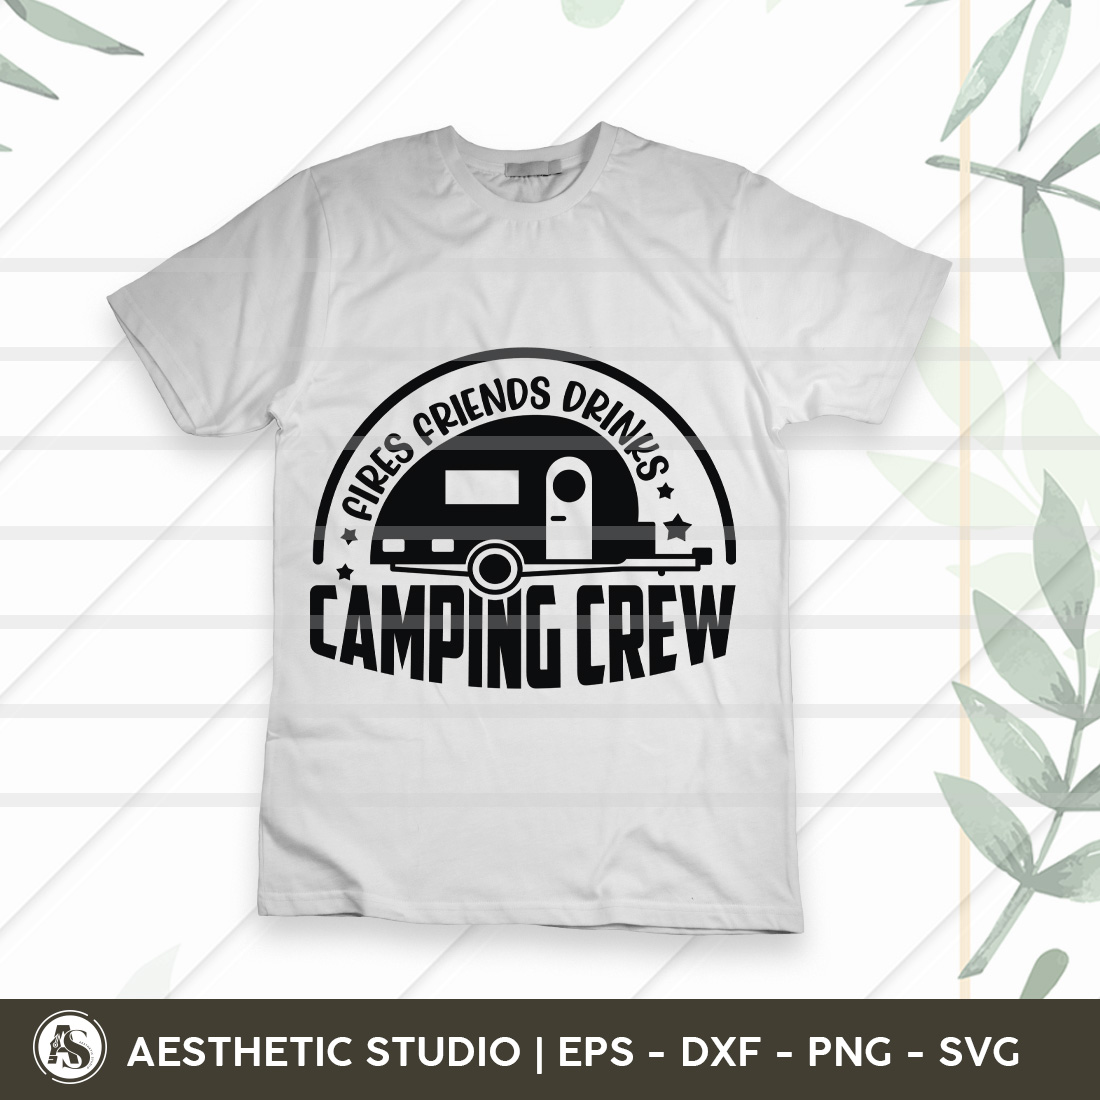 Camping Bundle Vol-03, Camping Hair Don\'t Care, Welcome Our Campe, Camping Is Our Favorite Season, Fries Friends Drinks Camping Crew, Live Love Laugh Camp, Camping Svg, SVG, Camping Quotes, Camping Bundle Design, Svg, Eps, Dxf, Png, Cut file preview image.